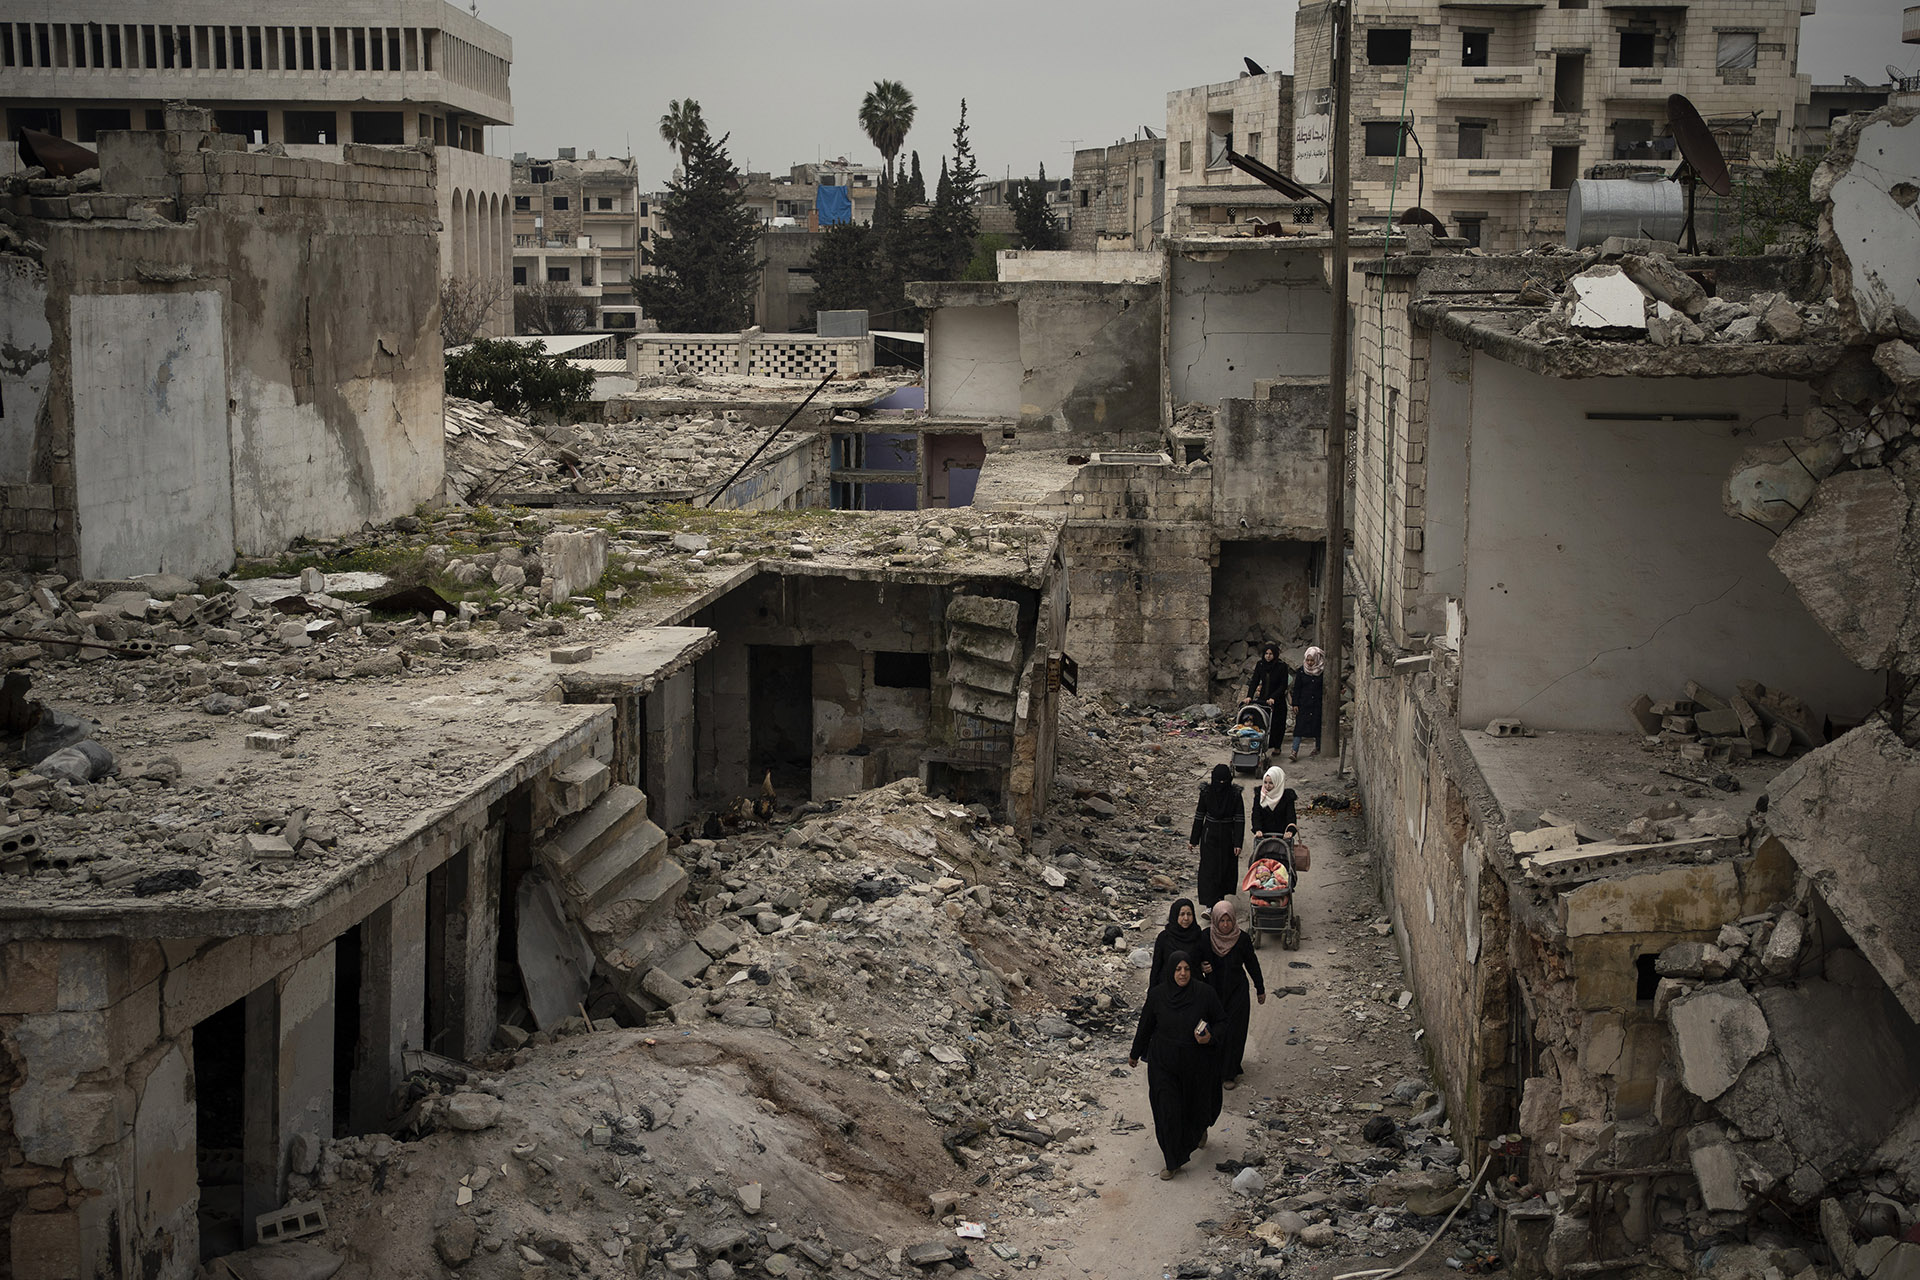 In this Thursday, March 12, 2020 photo, women walk in a neighborhood heavily damaged by airstrikes in Idlib, Syria. Idlib city is the last urban area still under opposition control in Syria, located in a shrinking rebel enclave in the northwestern province of the same name. Syria’s civil war, which entered its 10th year Monday, March 15, 2020, has shrunk in geographical scope -- focusing on this corner of the country -- but the misery wreaked by the conflict has not diminished. (AP Photo/Felipe Dana)